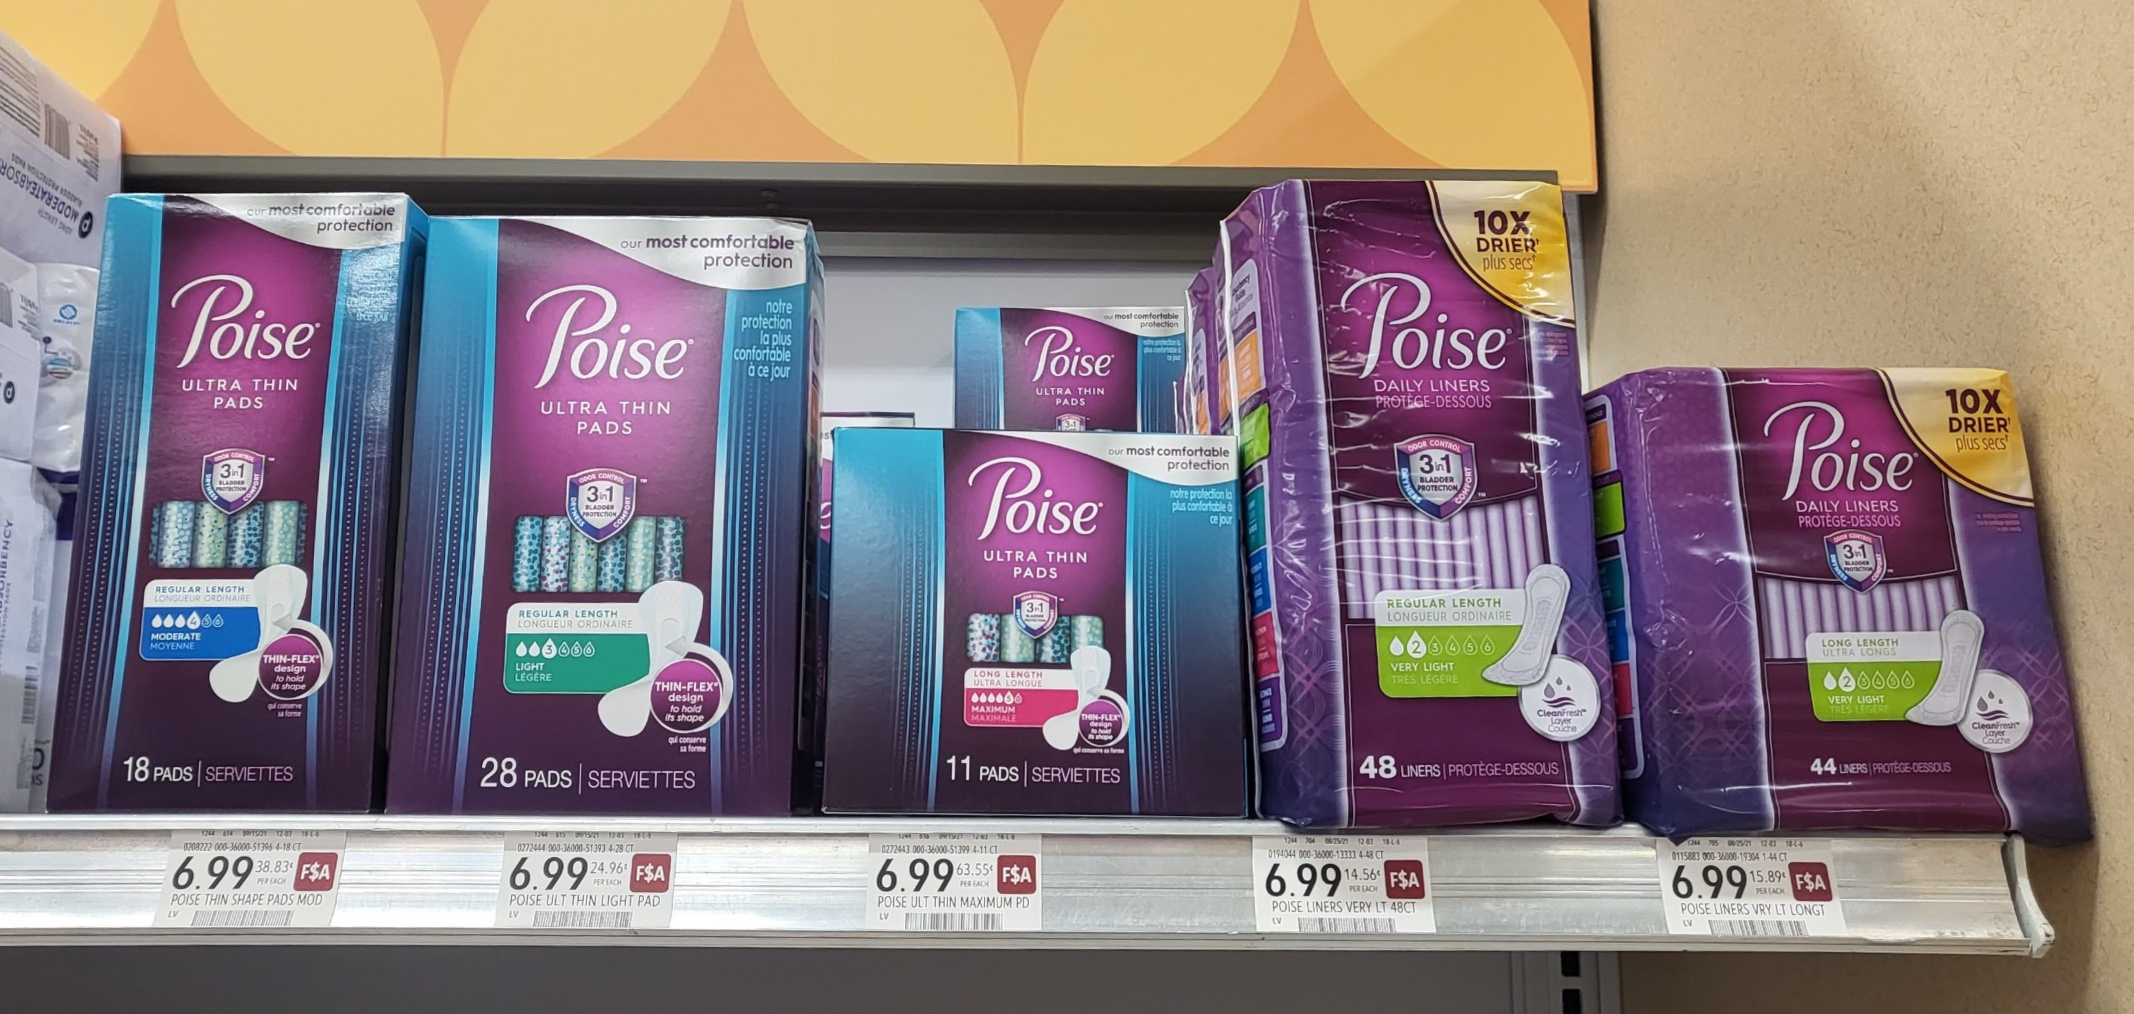 Save $3 On Poise® Ultra Thin Pads At Publix - Get A Flexible Fit For Whatever Happens! on I Heart Publix 2